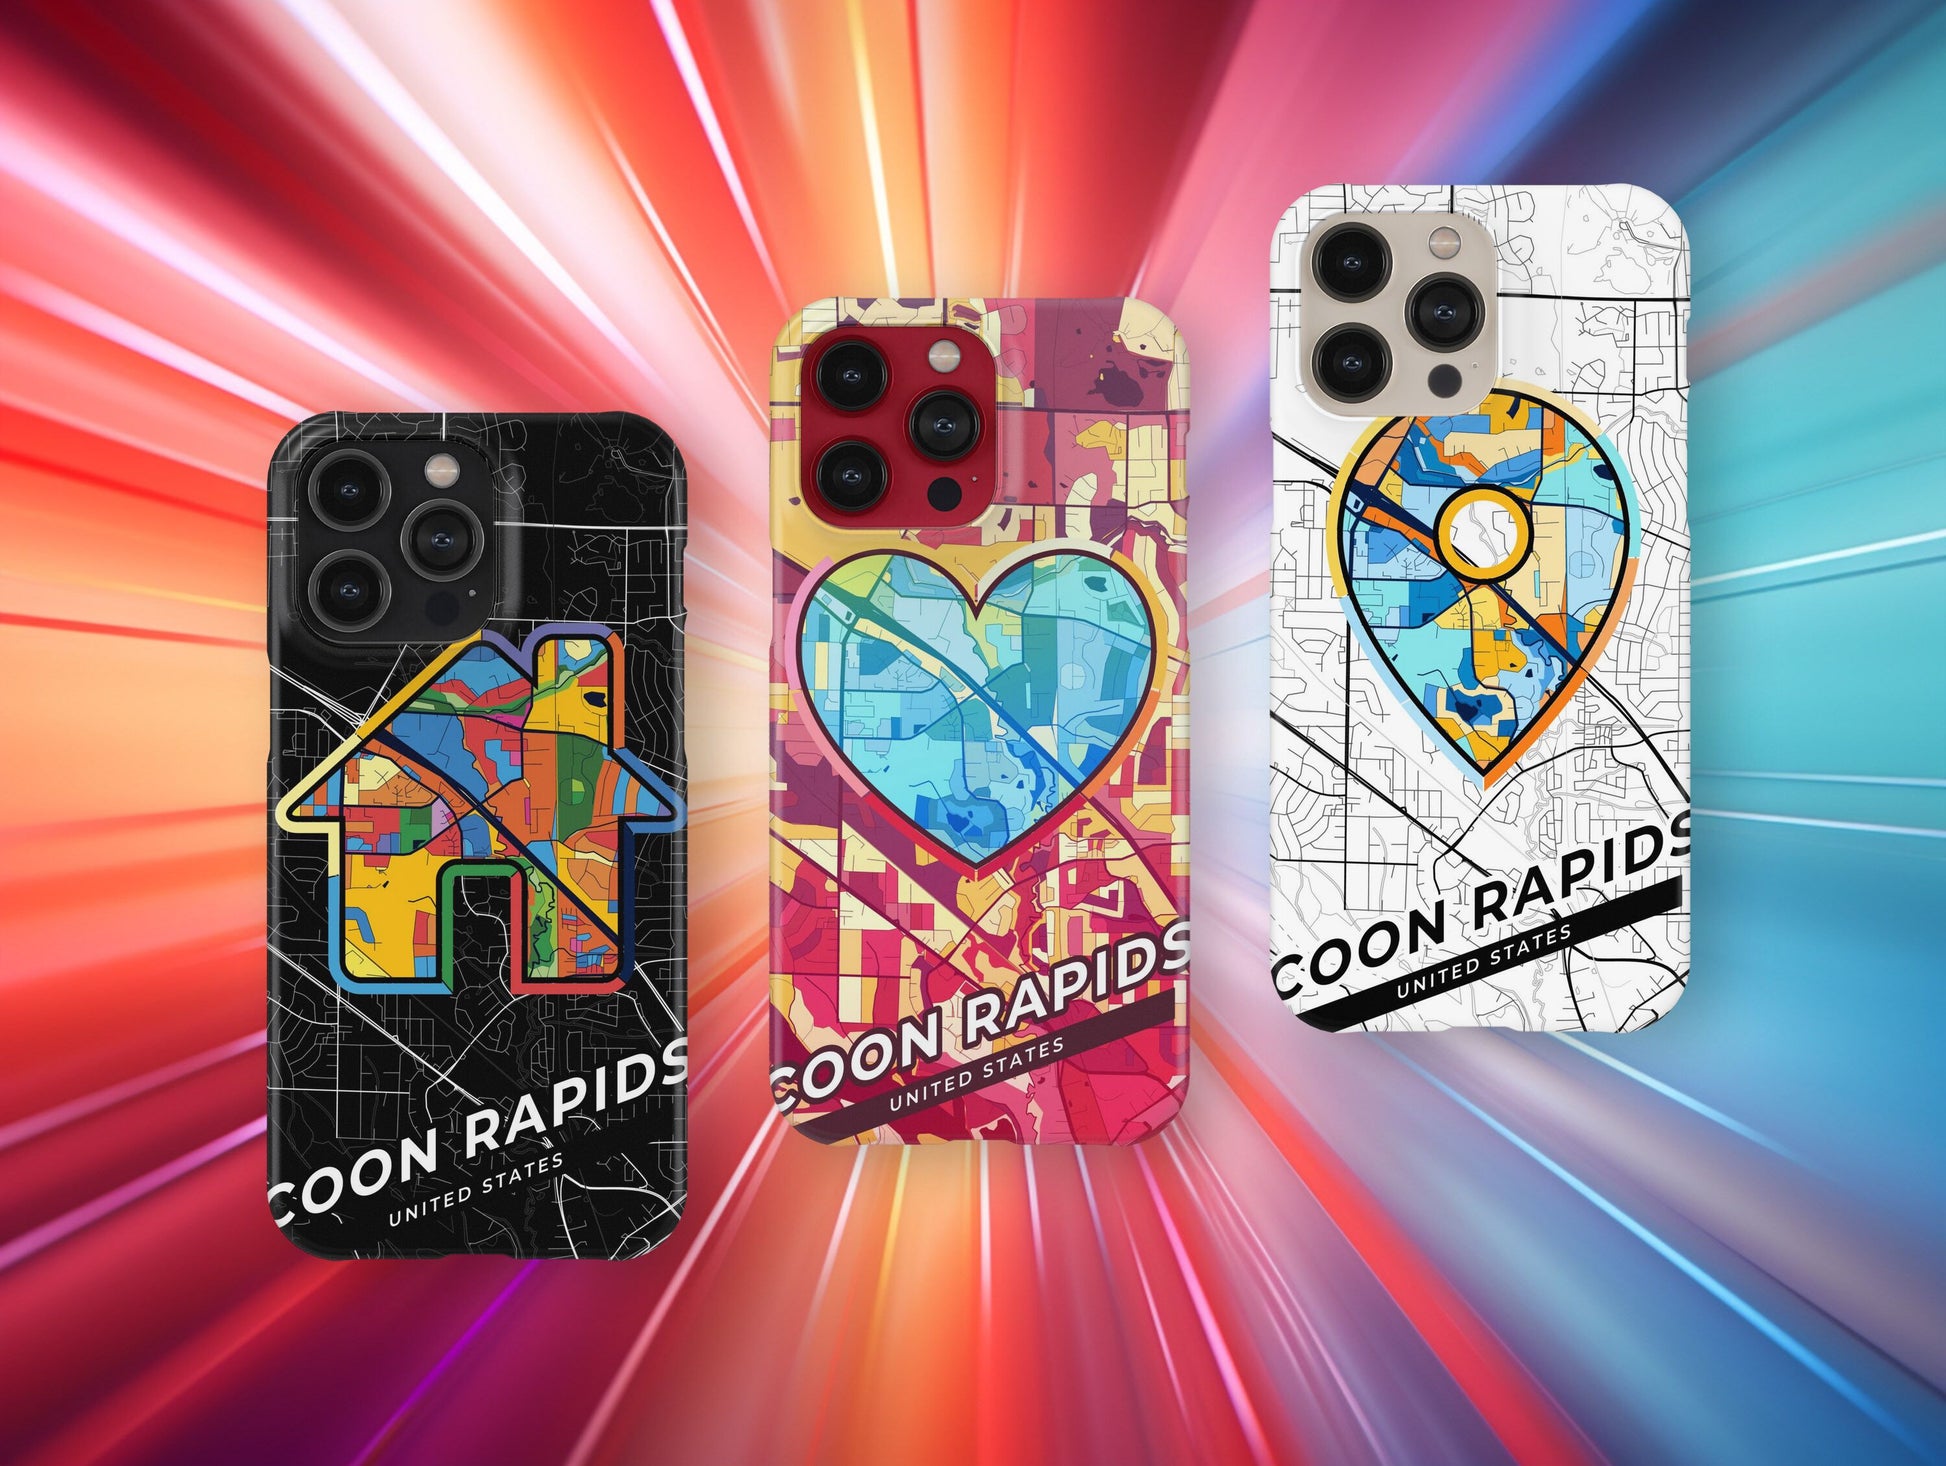 Coon Rapids Minnesota slim phone case with colorful icon. Birthday, wedding or housewarming gift. Couple match cases.